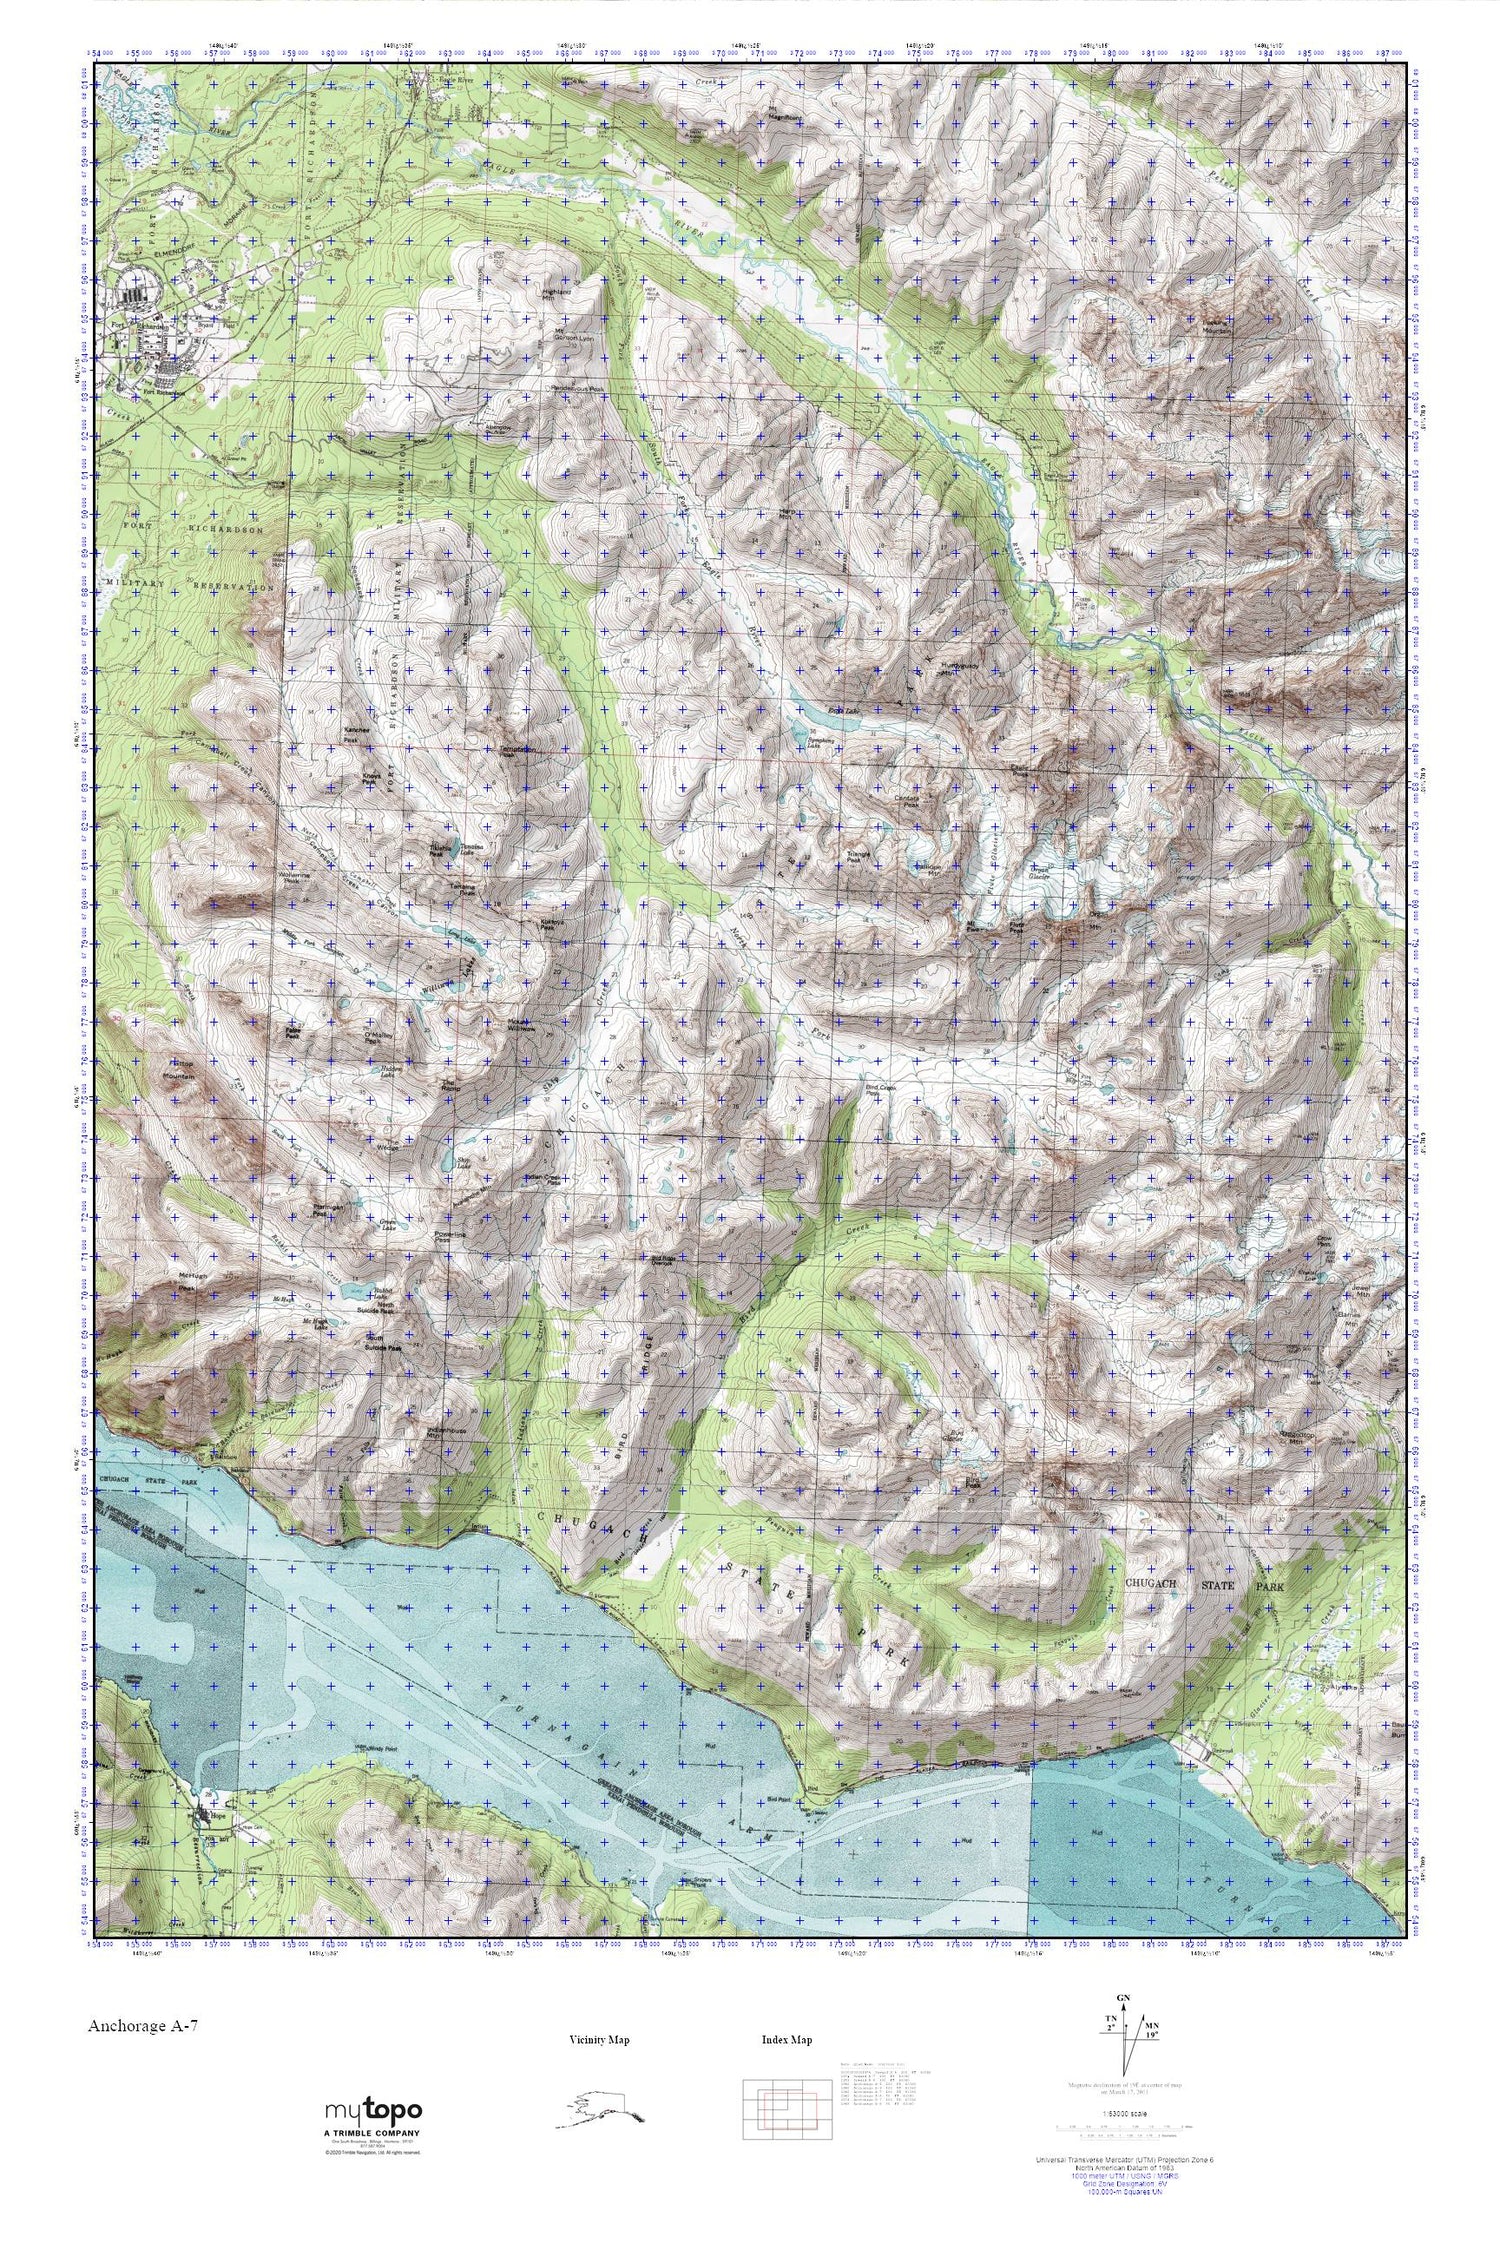 Anchorage A-7 MyTopo Explorer Series Map Image